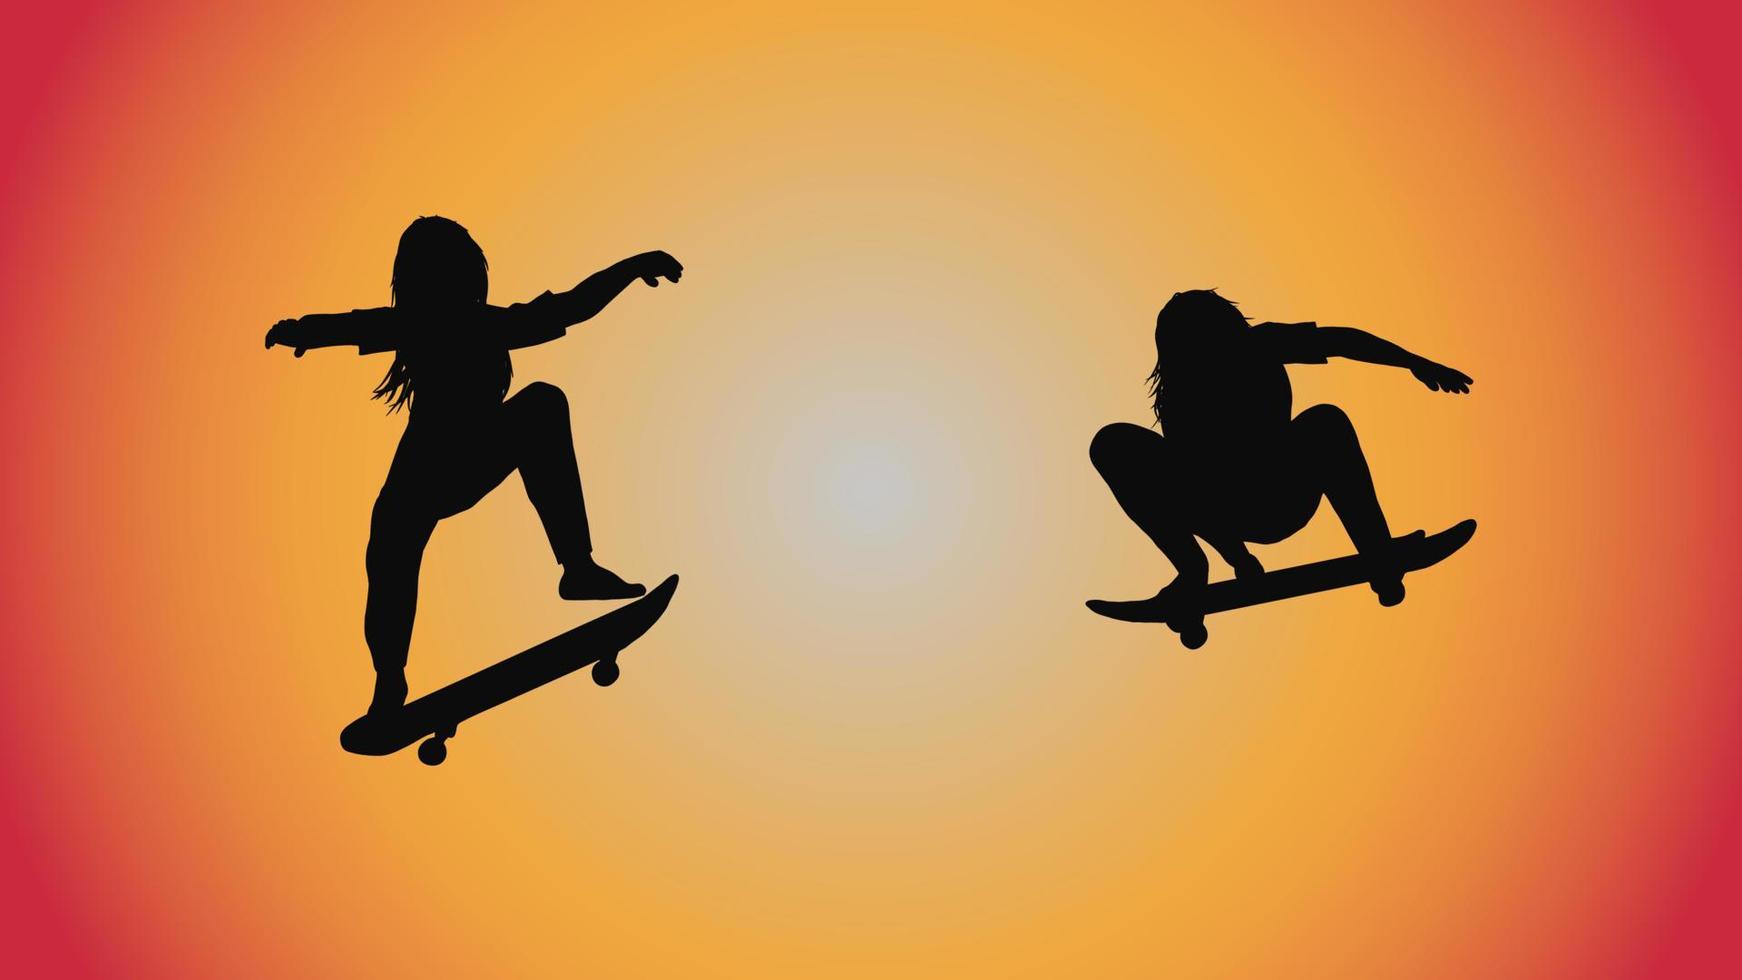 abstract background of silhouette woman skateboard pose vector